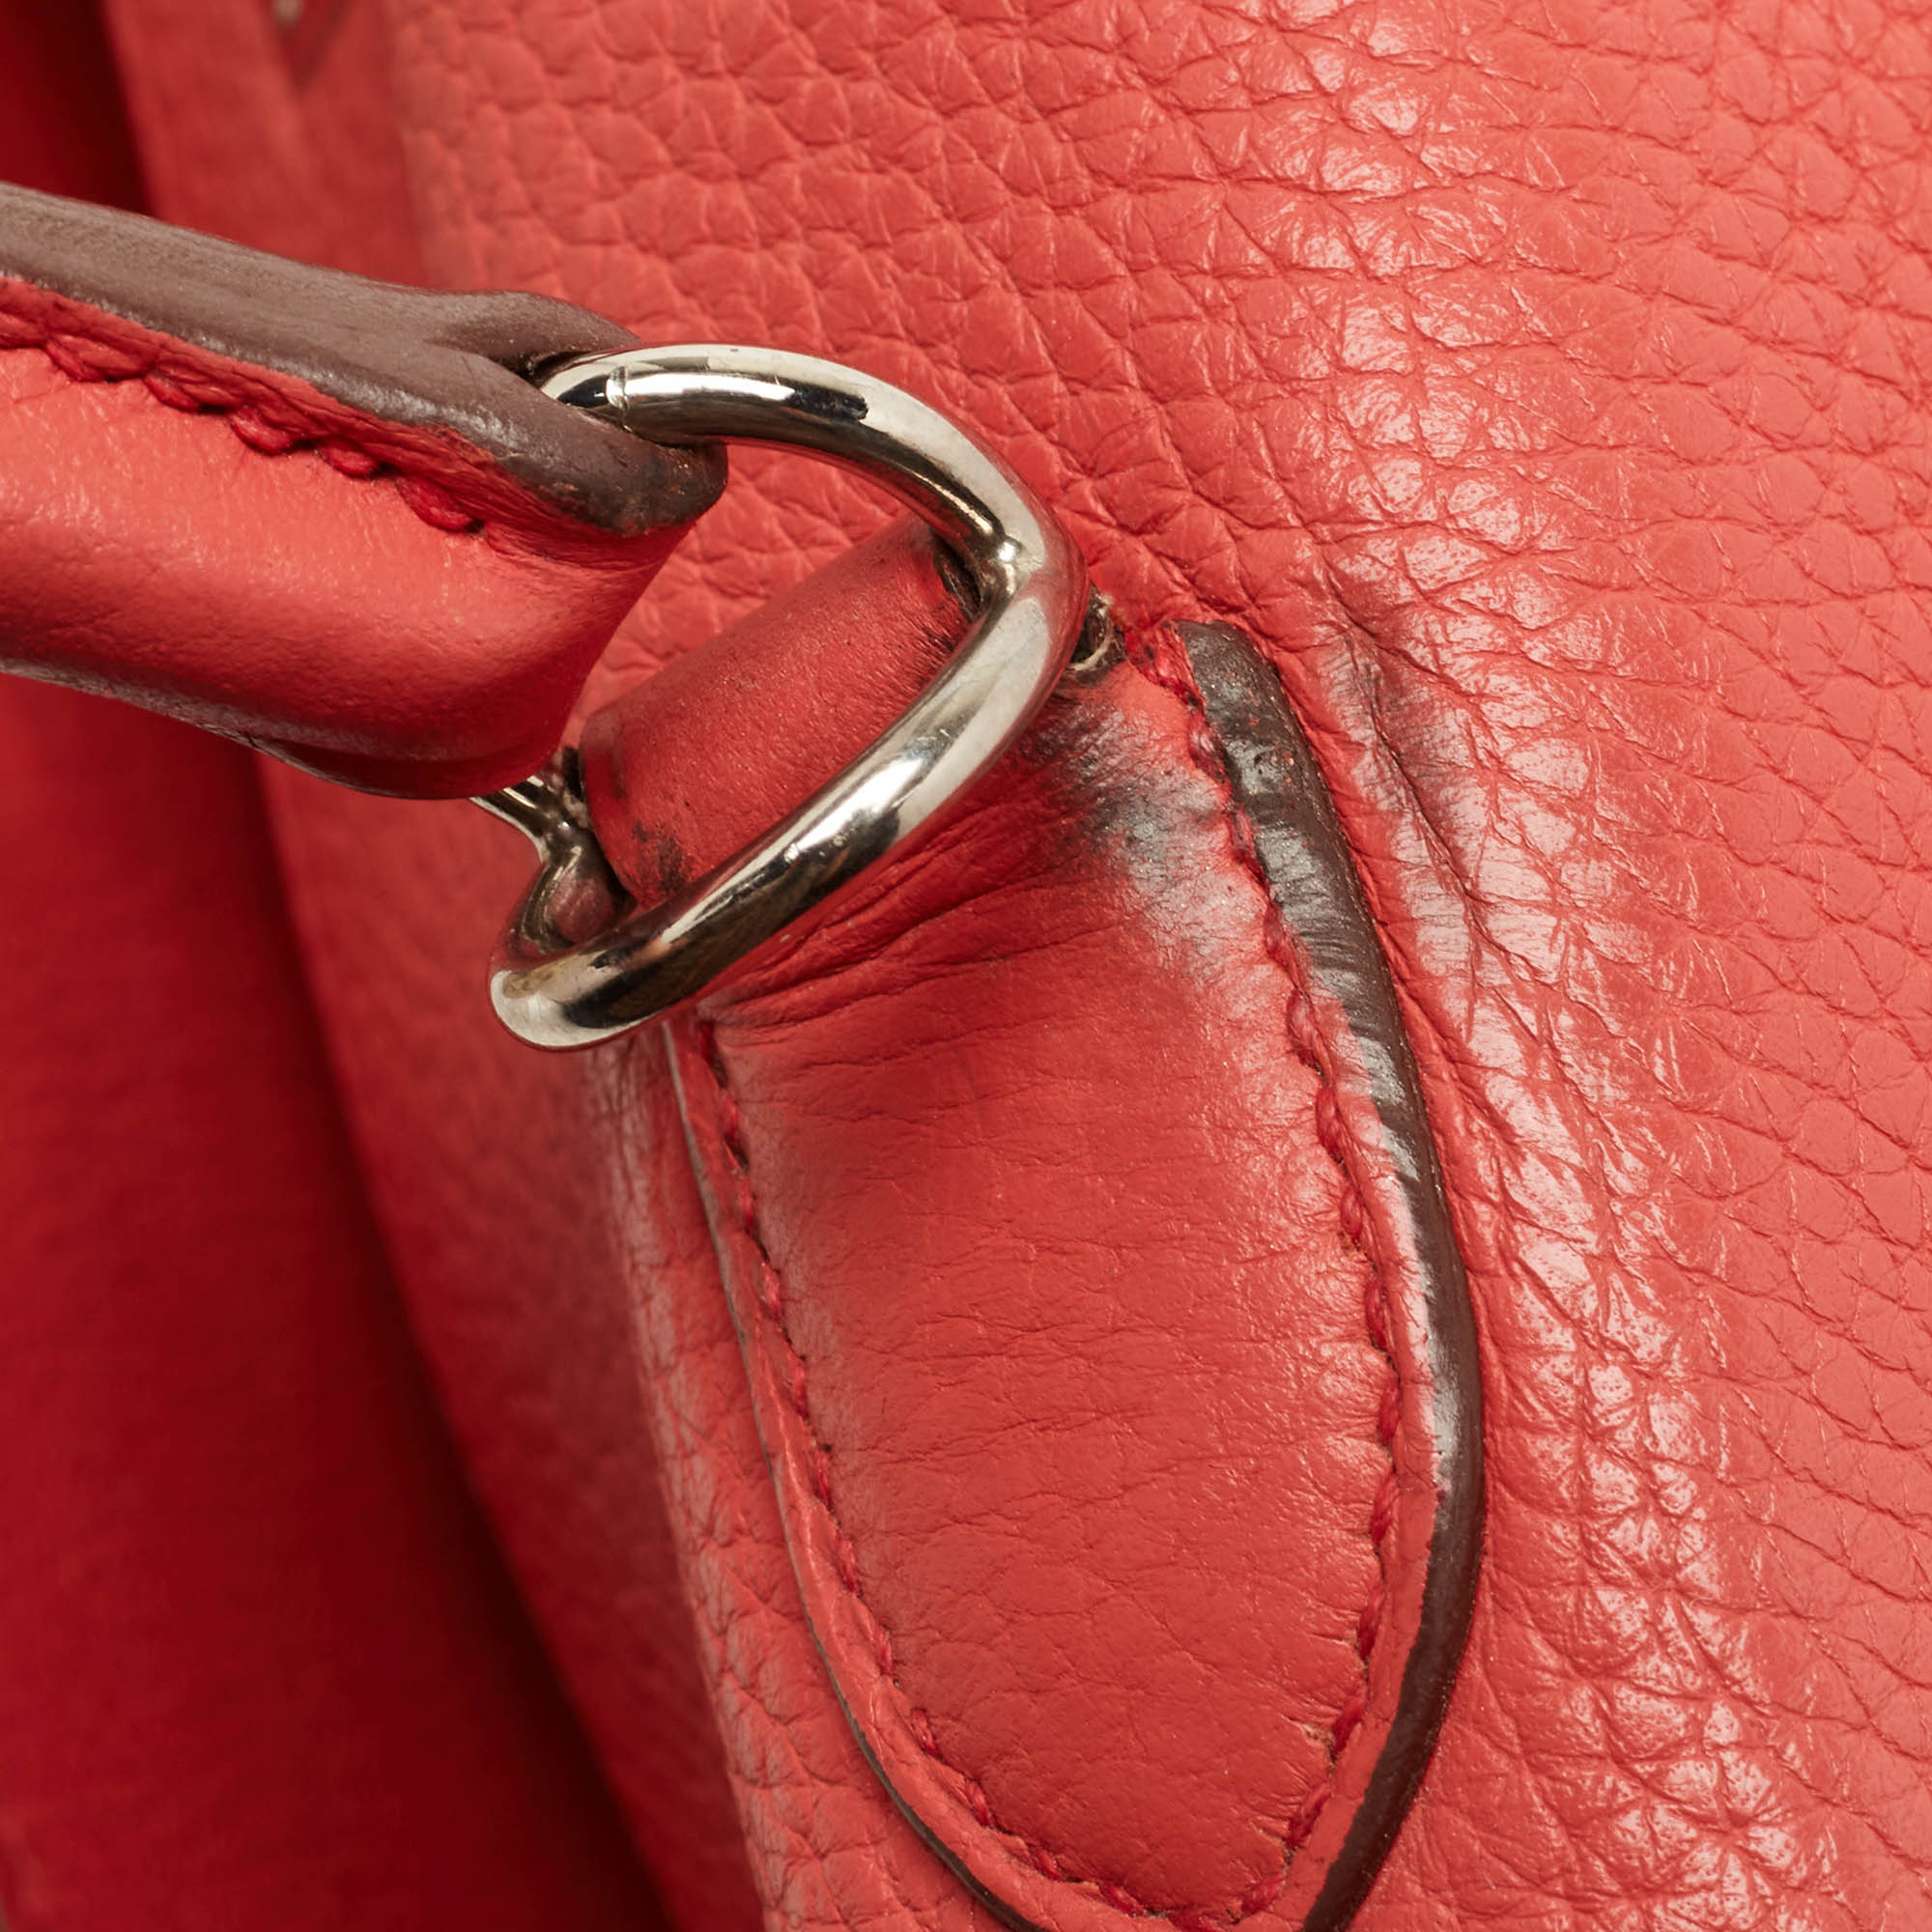 Rose Jaipur, Etoupe and Argile in Swift and Clemence Leather Birkin 35  Palladium Hardware, 2012, Handbags and Accessories, 2021